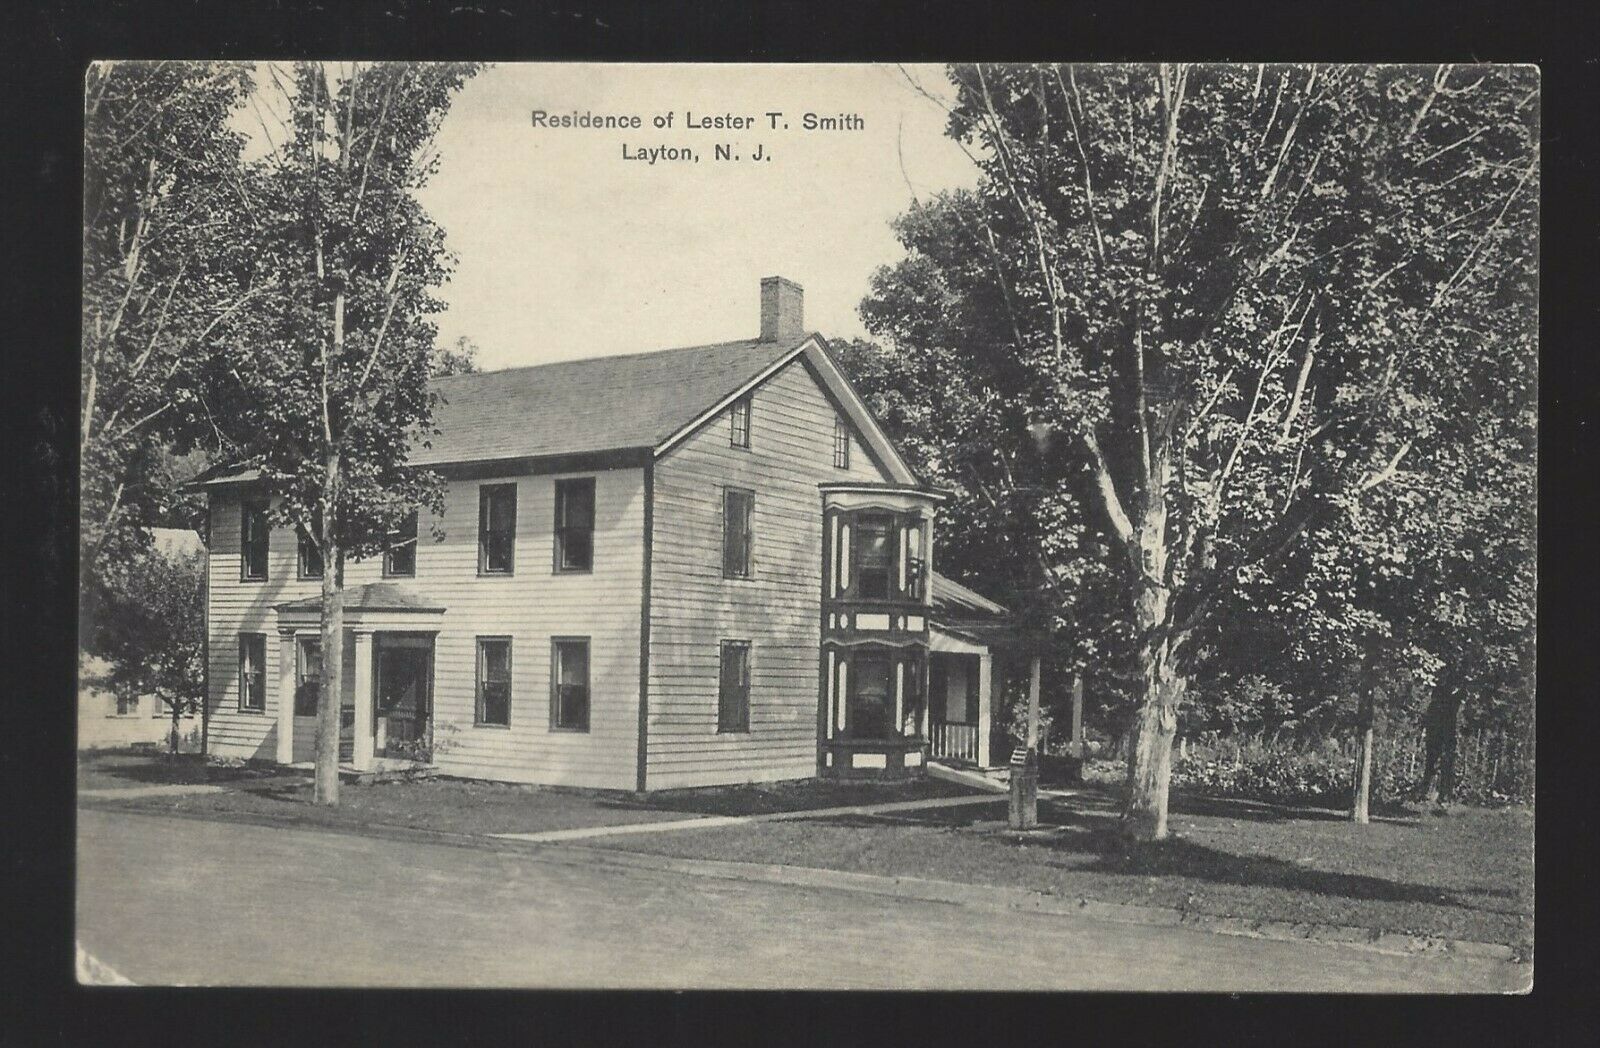 Layton - Sussex County - Lester T Smith residence - c1910